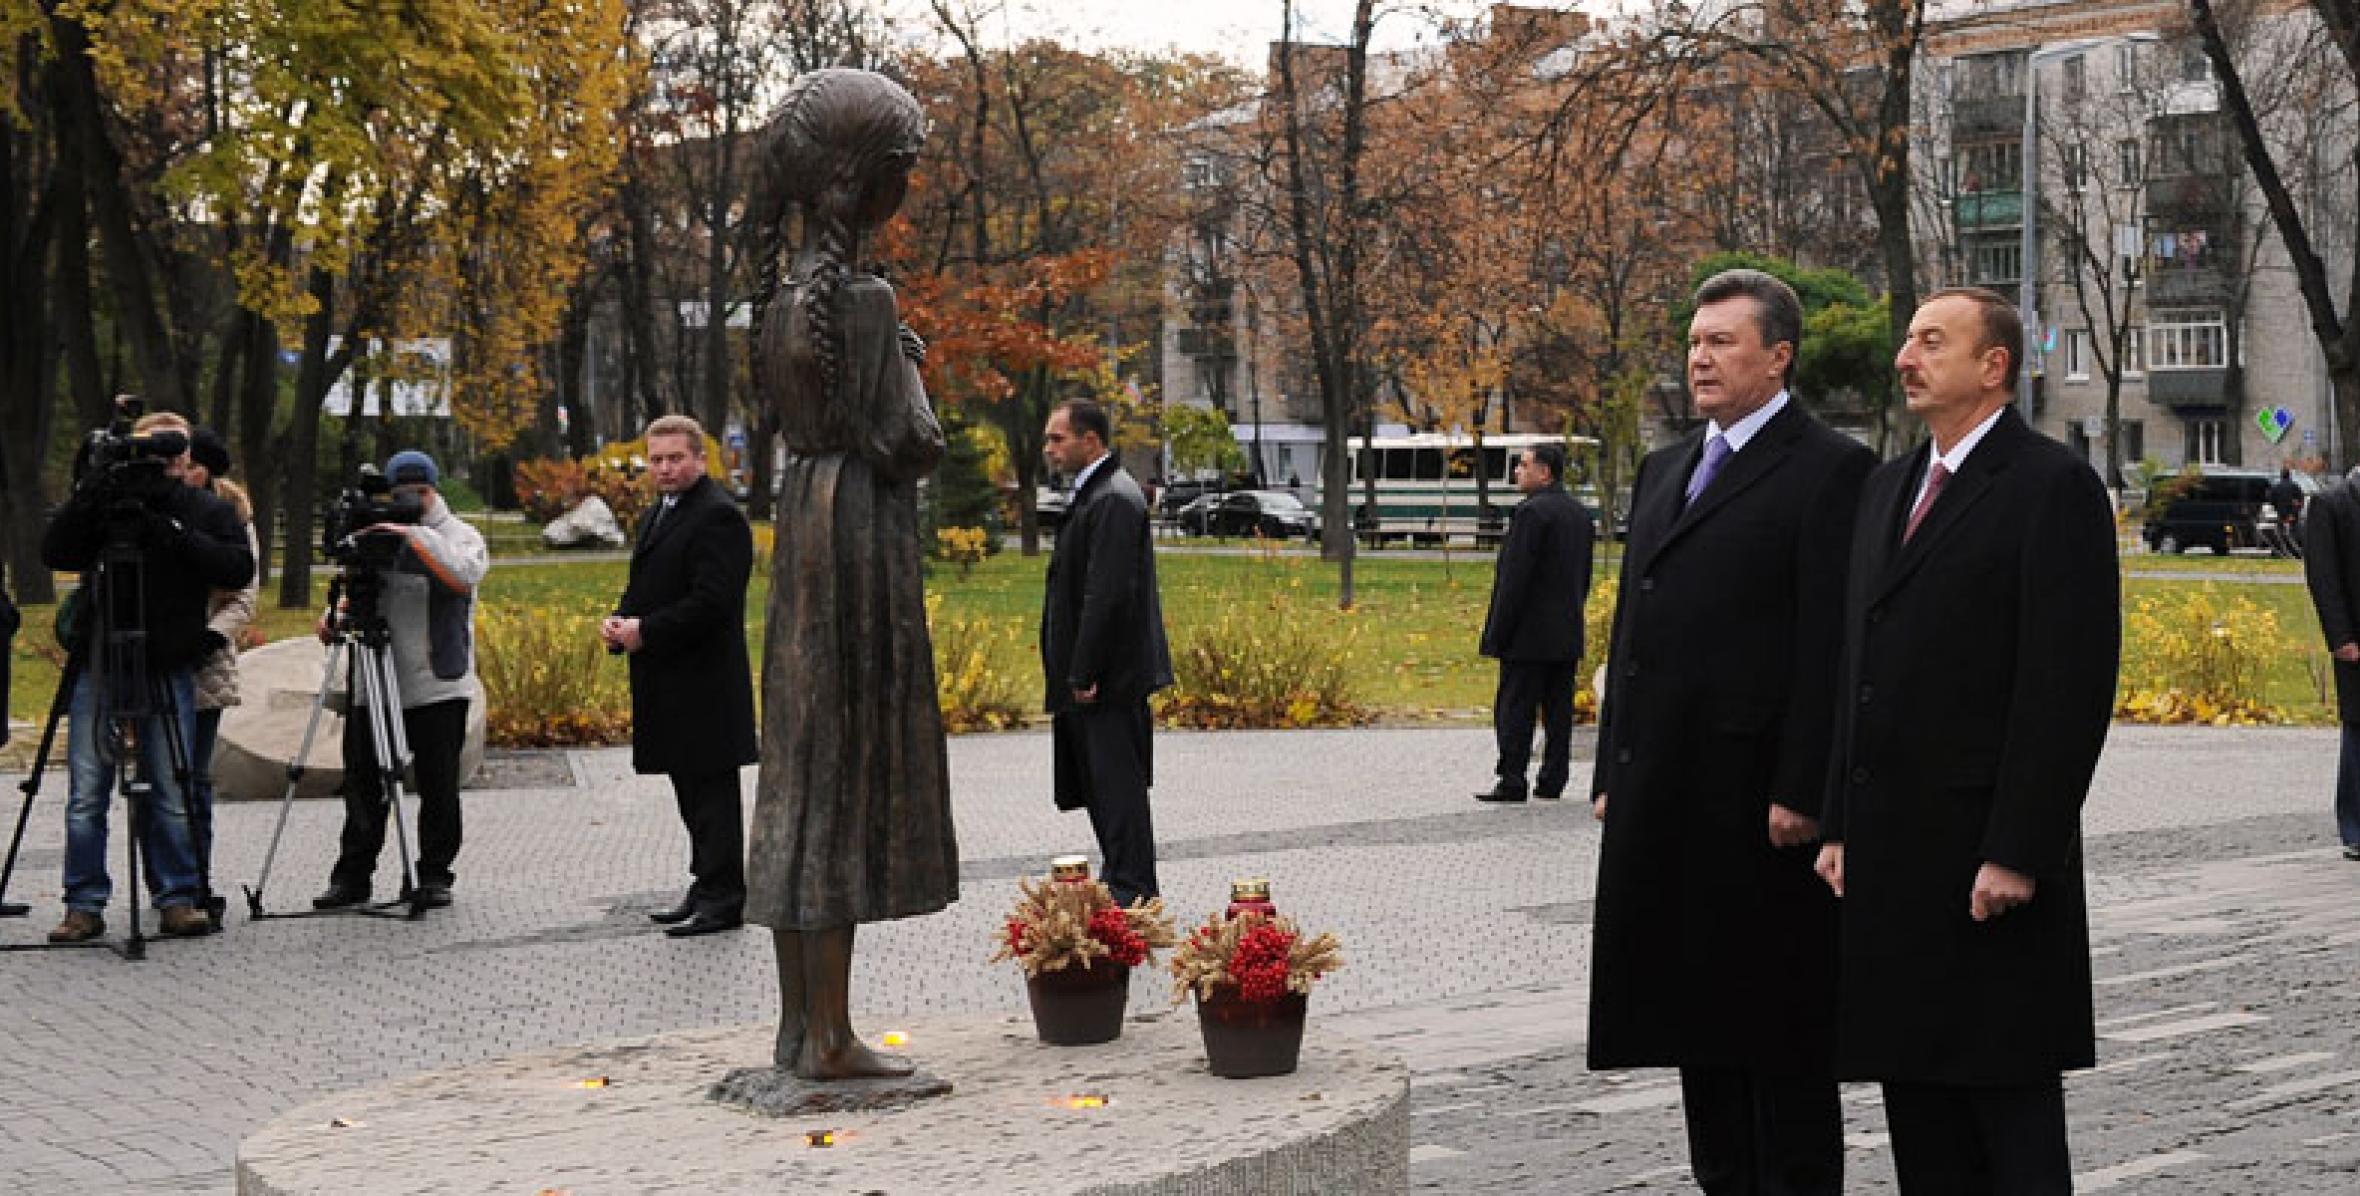 Presidents of Azerbaijan and Ukraine paid tribute to the monument dedicated to the dead of famine